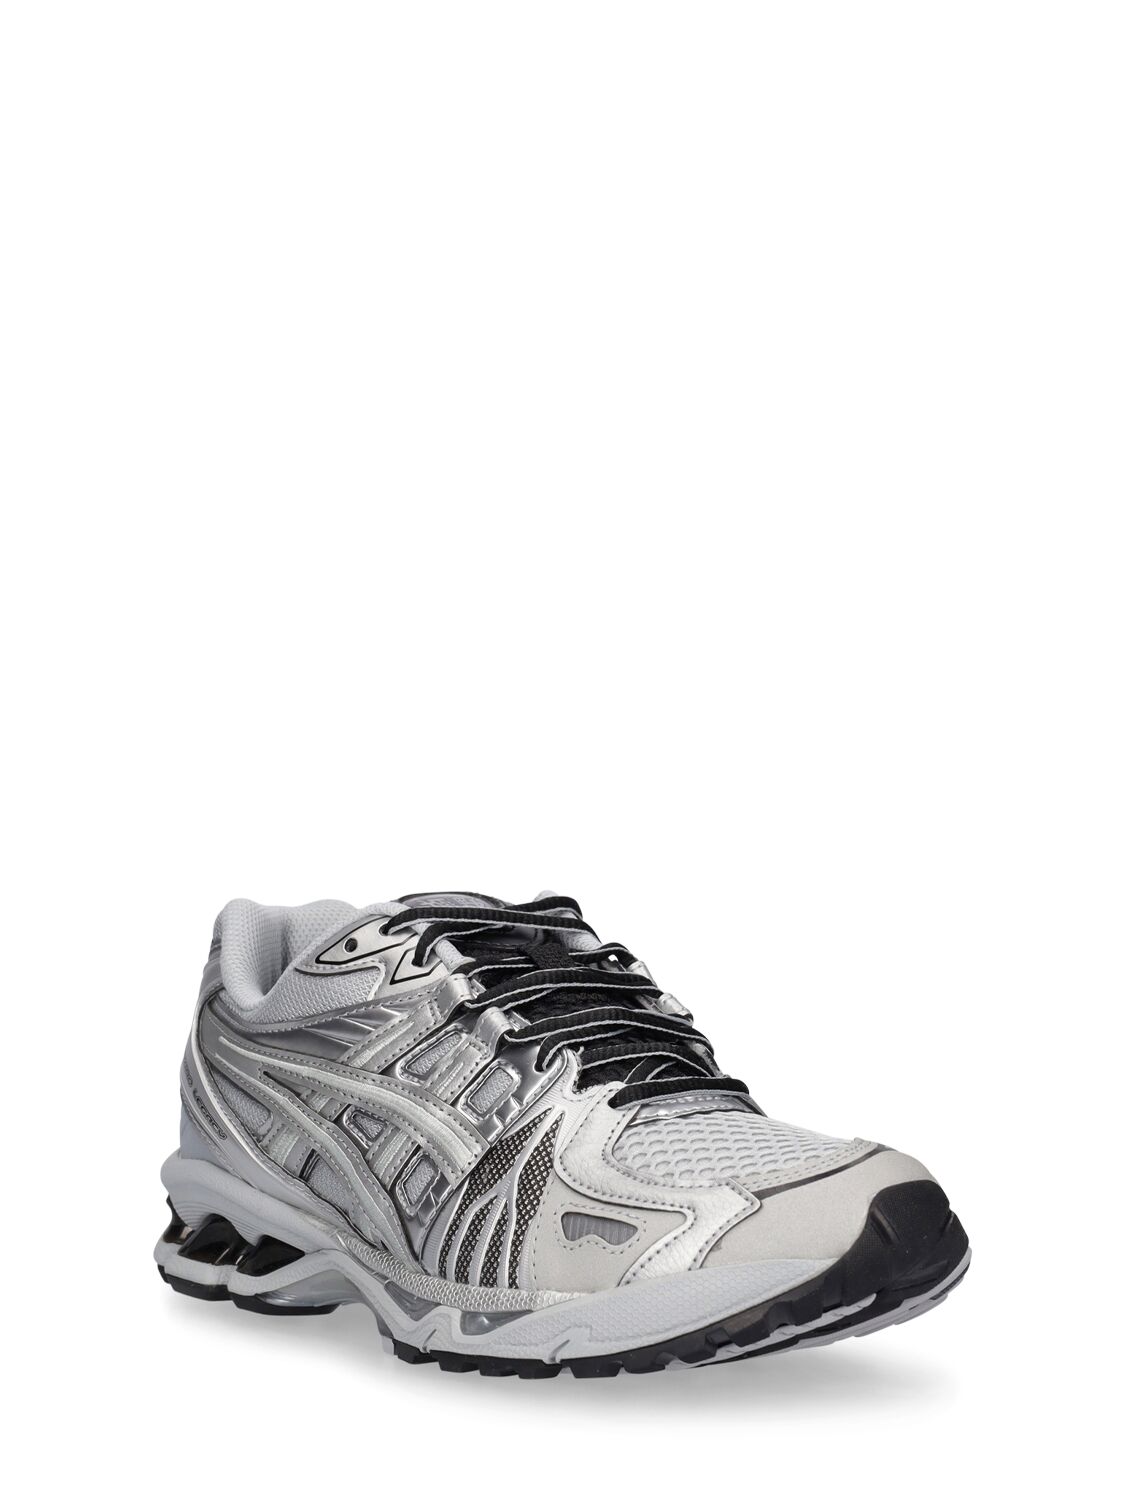 Asics Gel-kayano Legacy Sneakers In Pure Silver | ModeSens